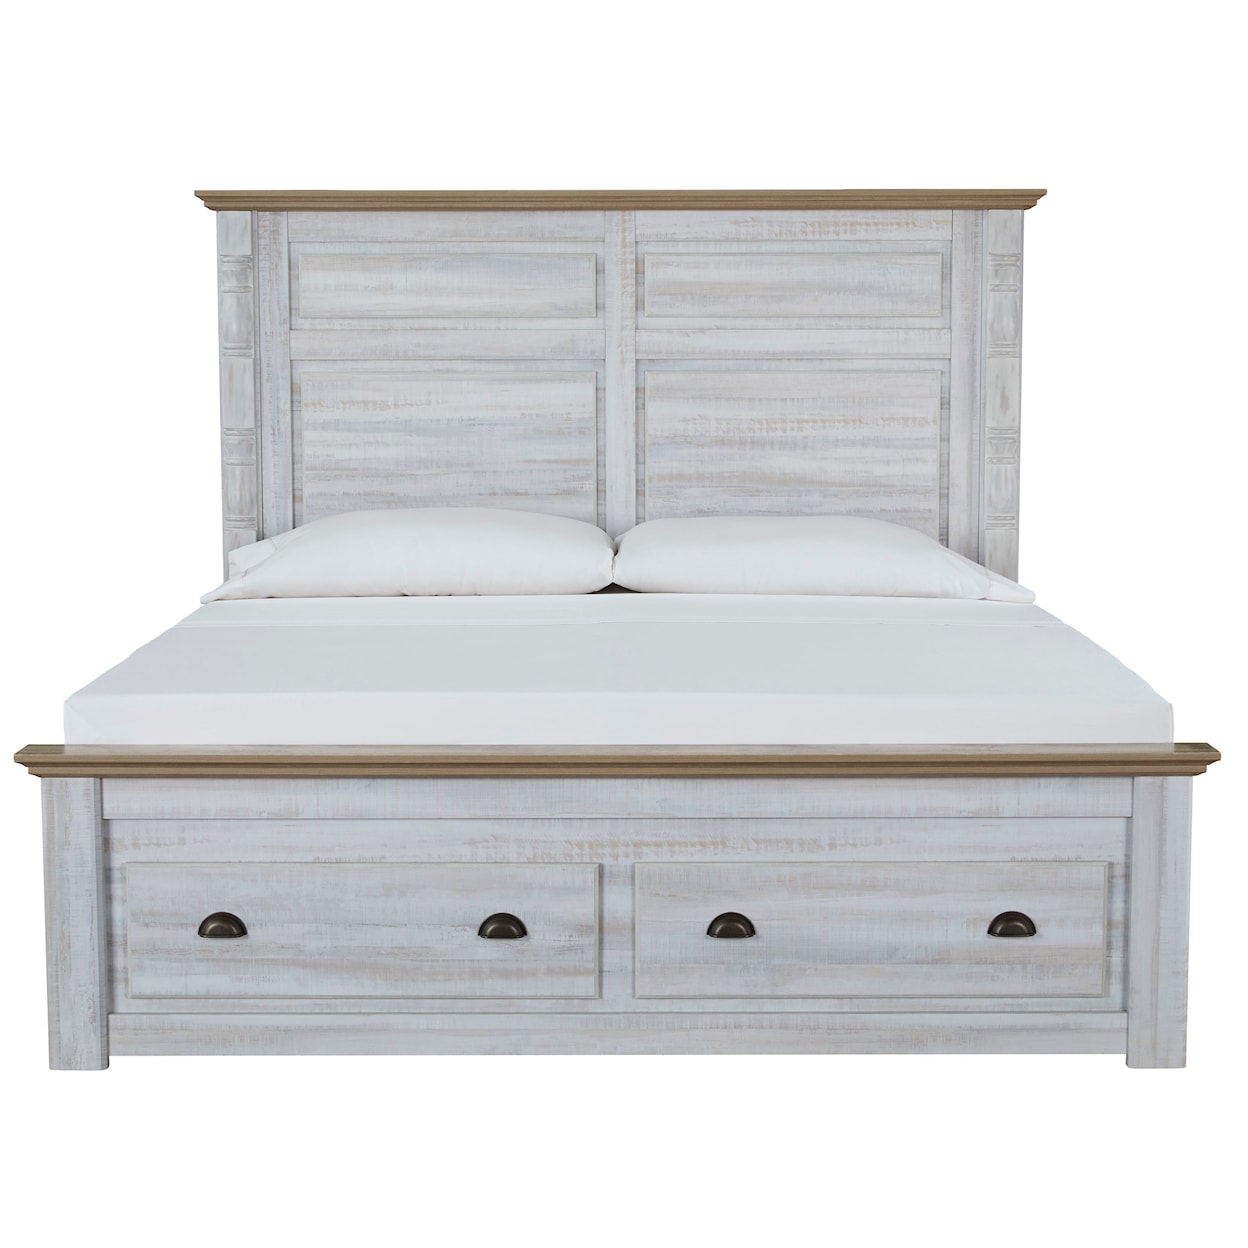 Signature Design by Ashley Haven Bay King Panel Storage Bed